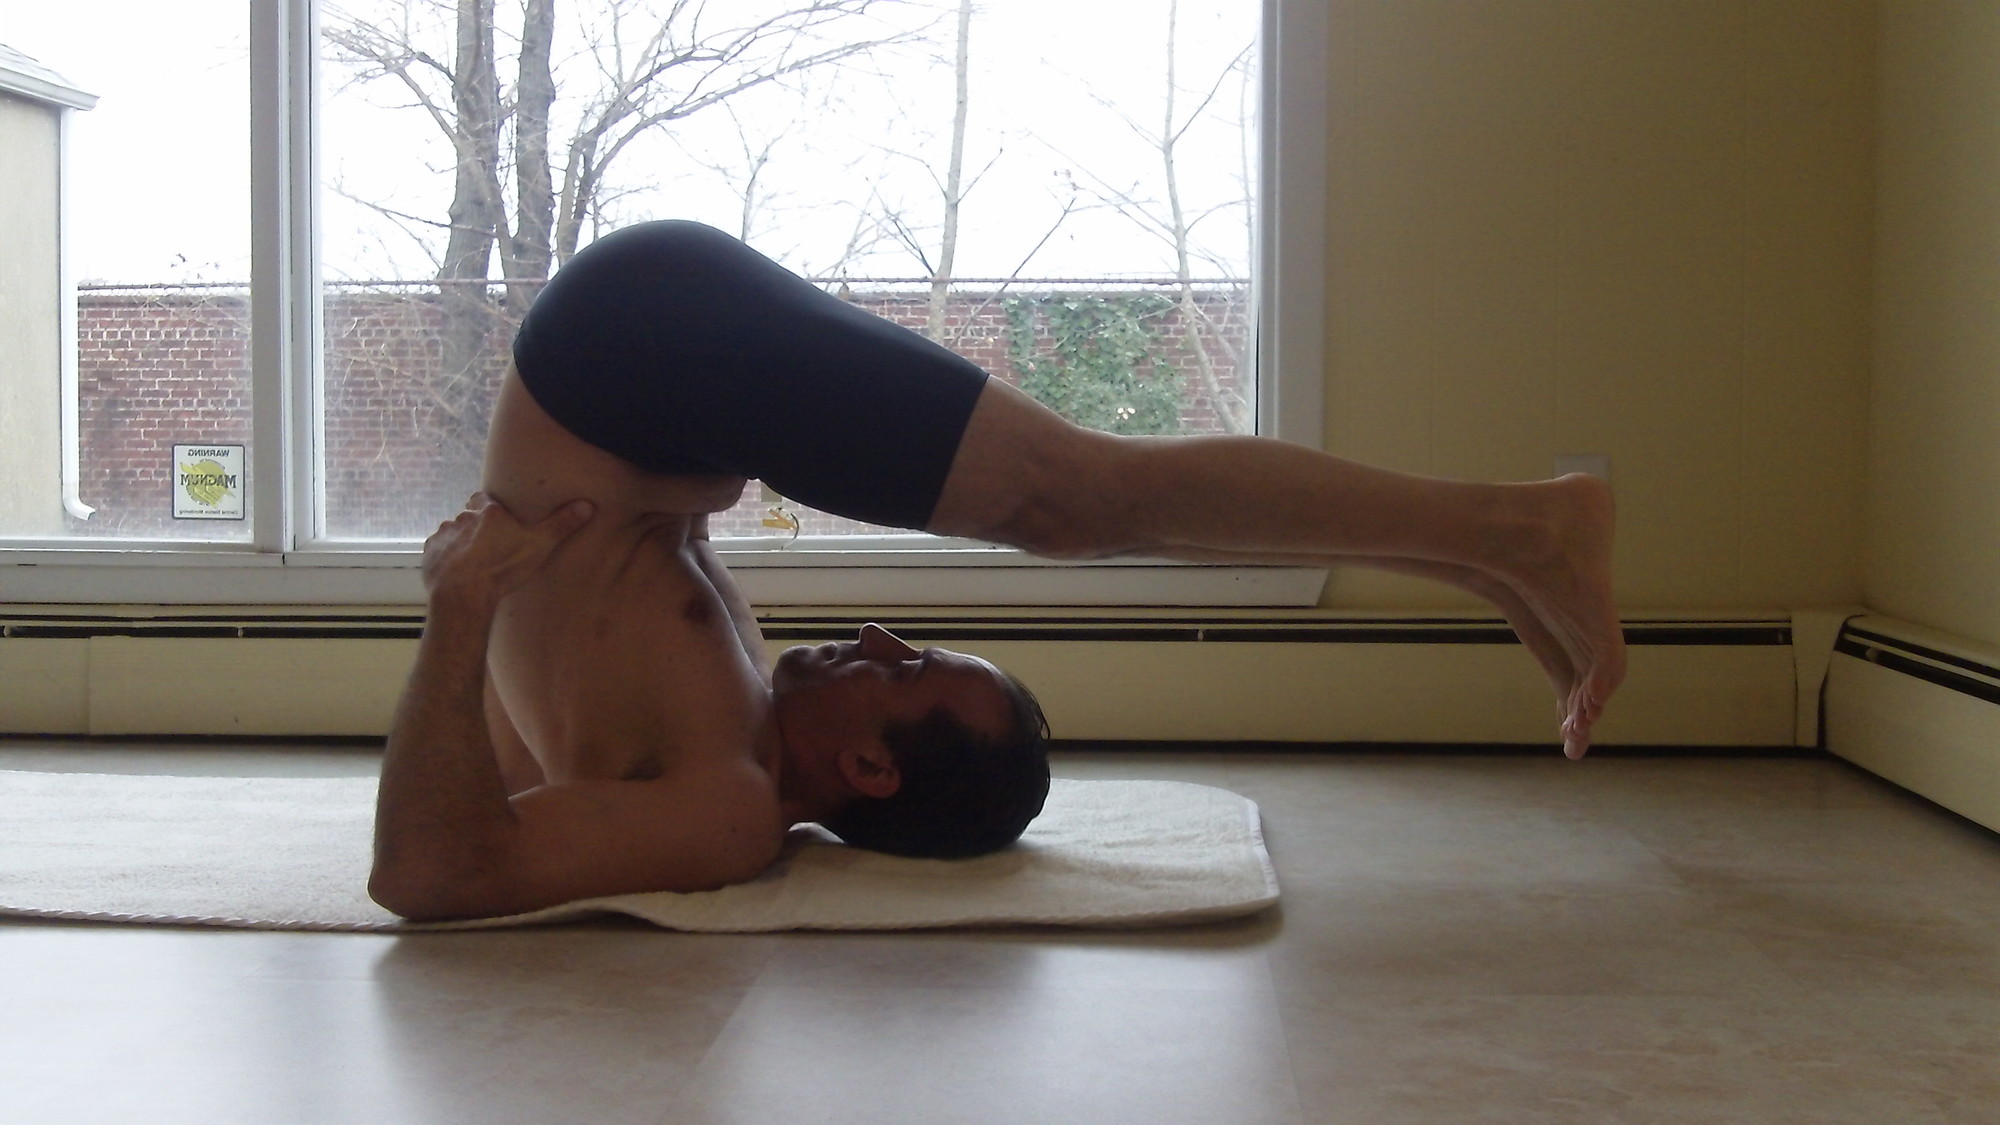 Joseph Parenti practices Bikram yoga regularly, saying the poses and the heat are great therapies for his neck.